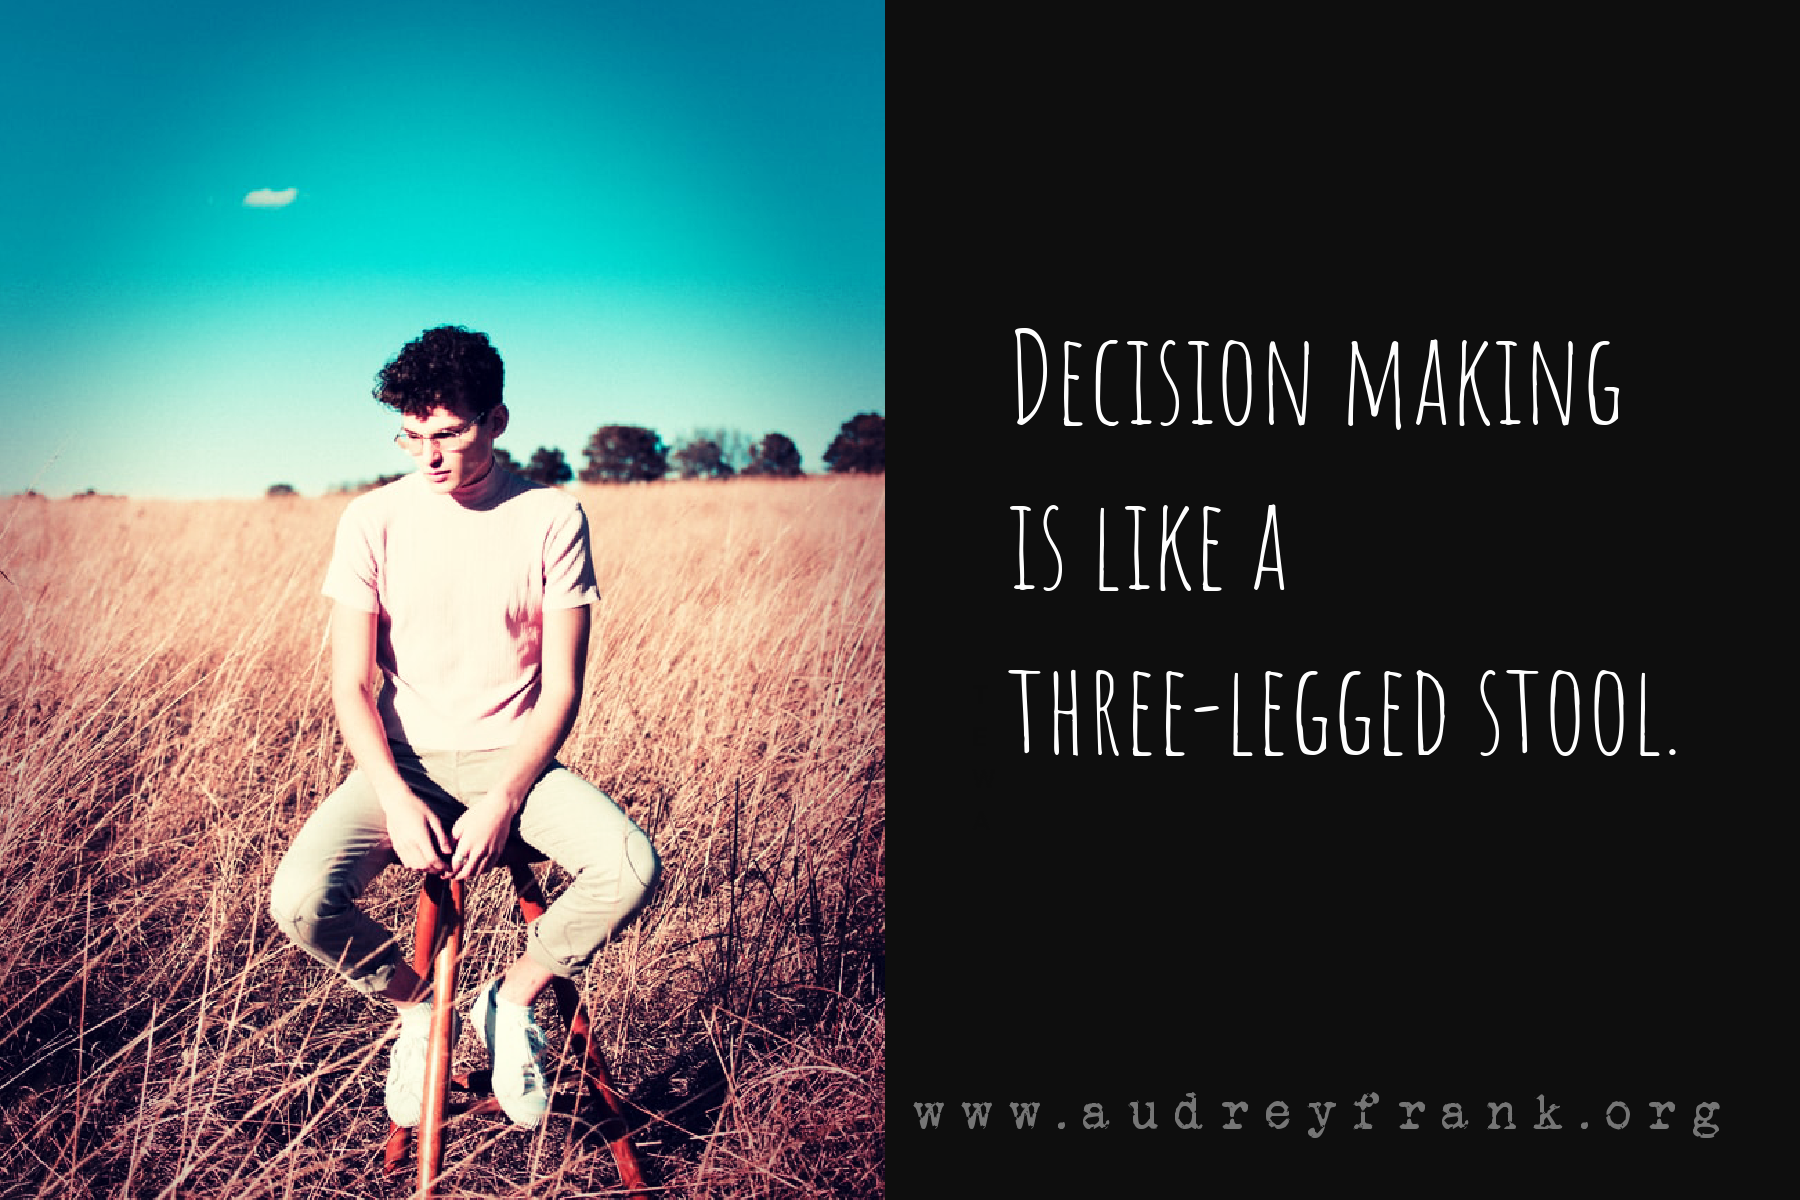 A young man sitting on a stool with three legs. A title says decision making is like a three legged stool.